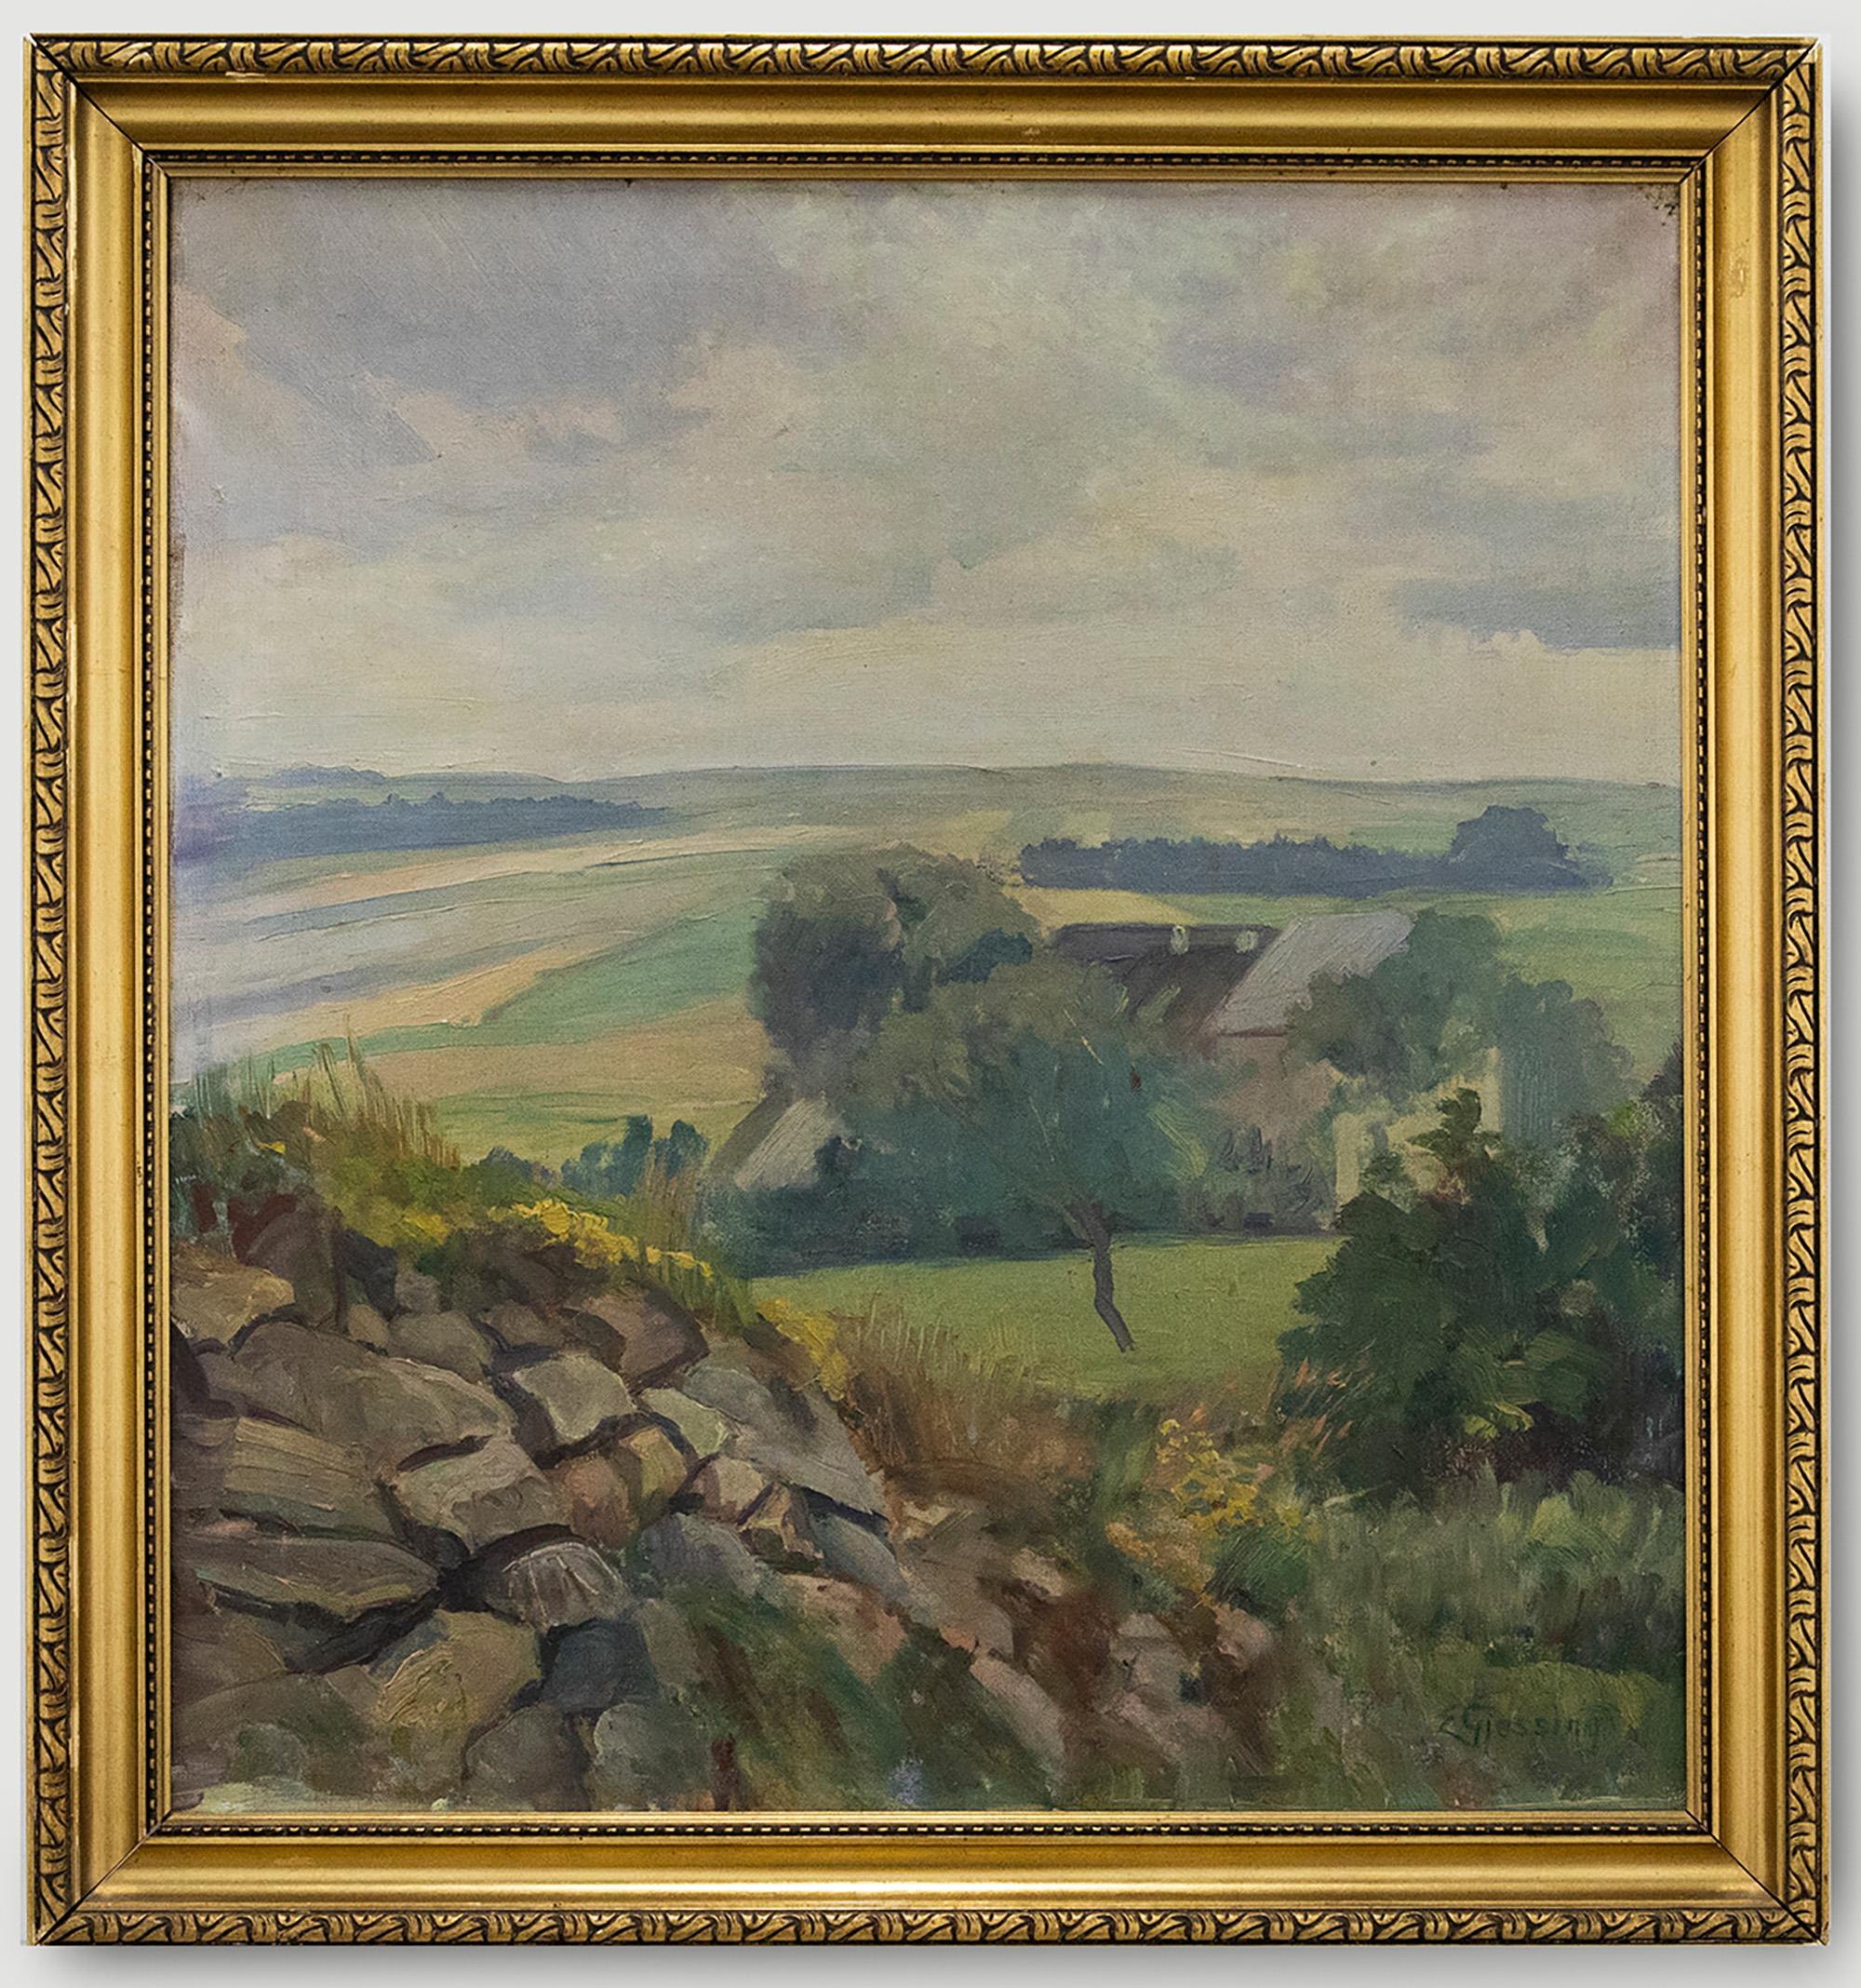 A charming oil study of the view of the vast valley. The artist starts our viewpoint at a drystone wall and extends it out to the expansive greenery. Signed to the lower right. Presented in a gilt frame. On canvas.